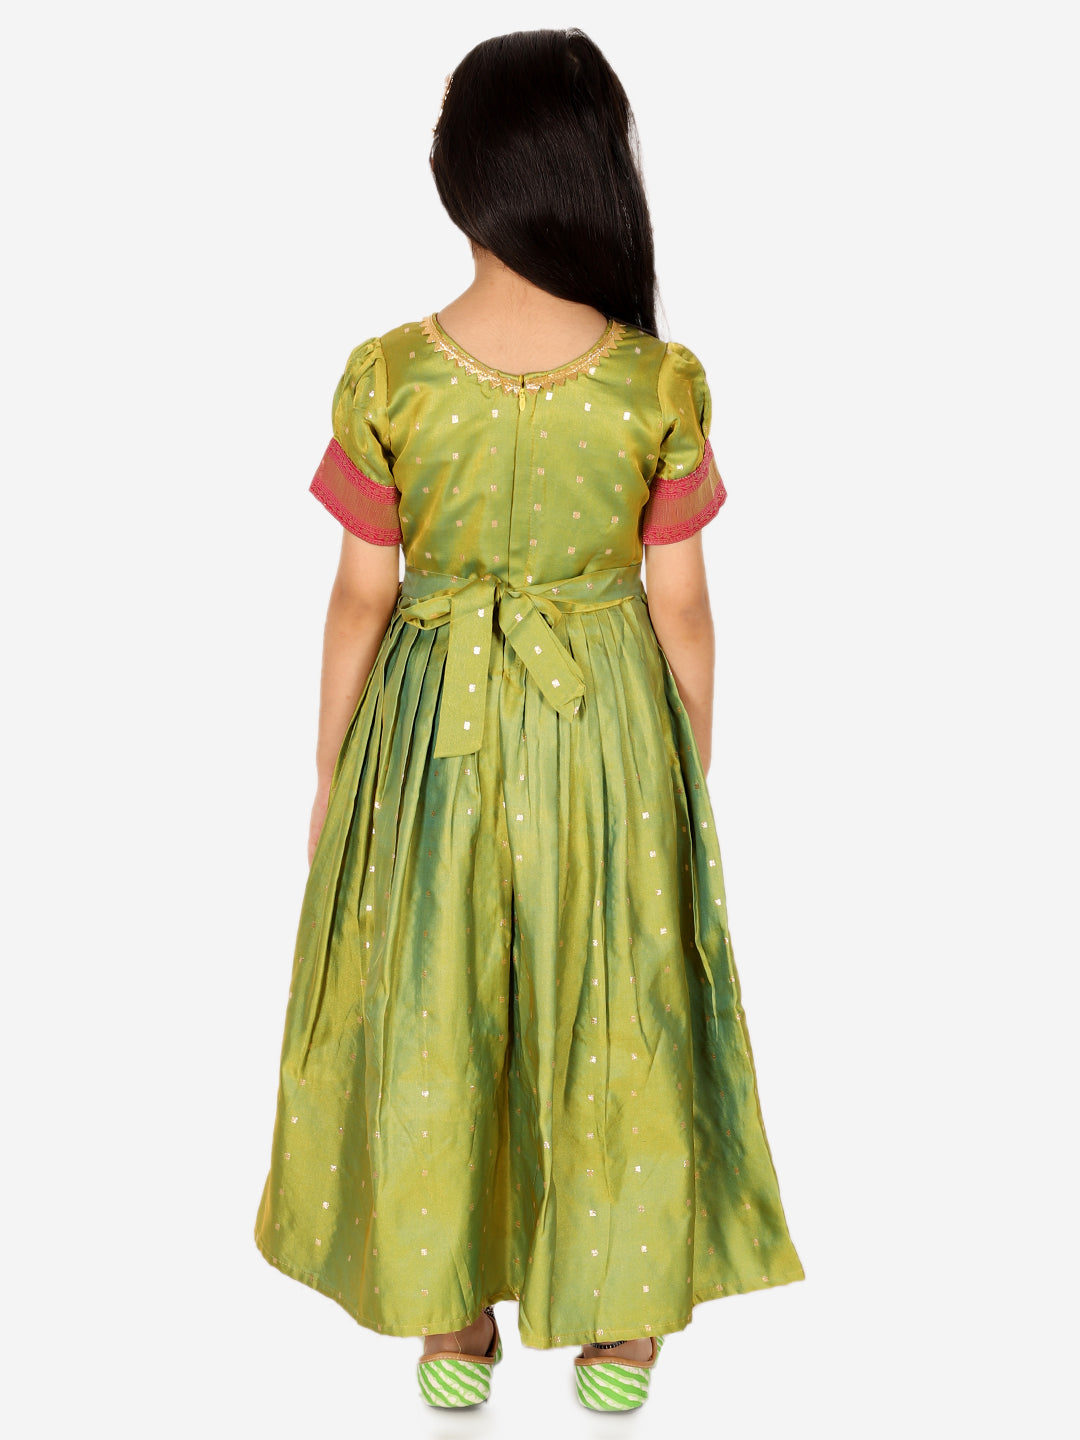 BownBee Silk Booti Party Dress Gown for Girls- Green